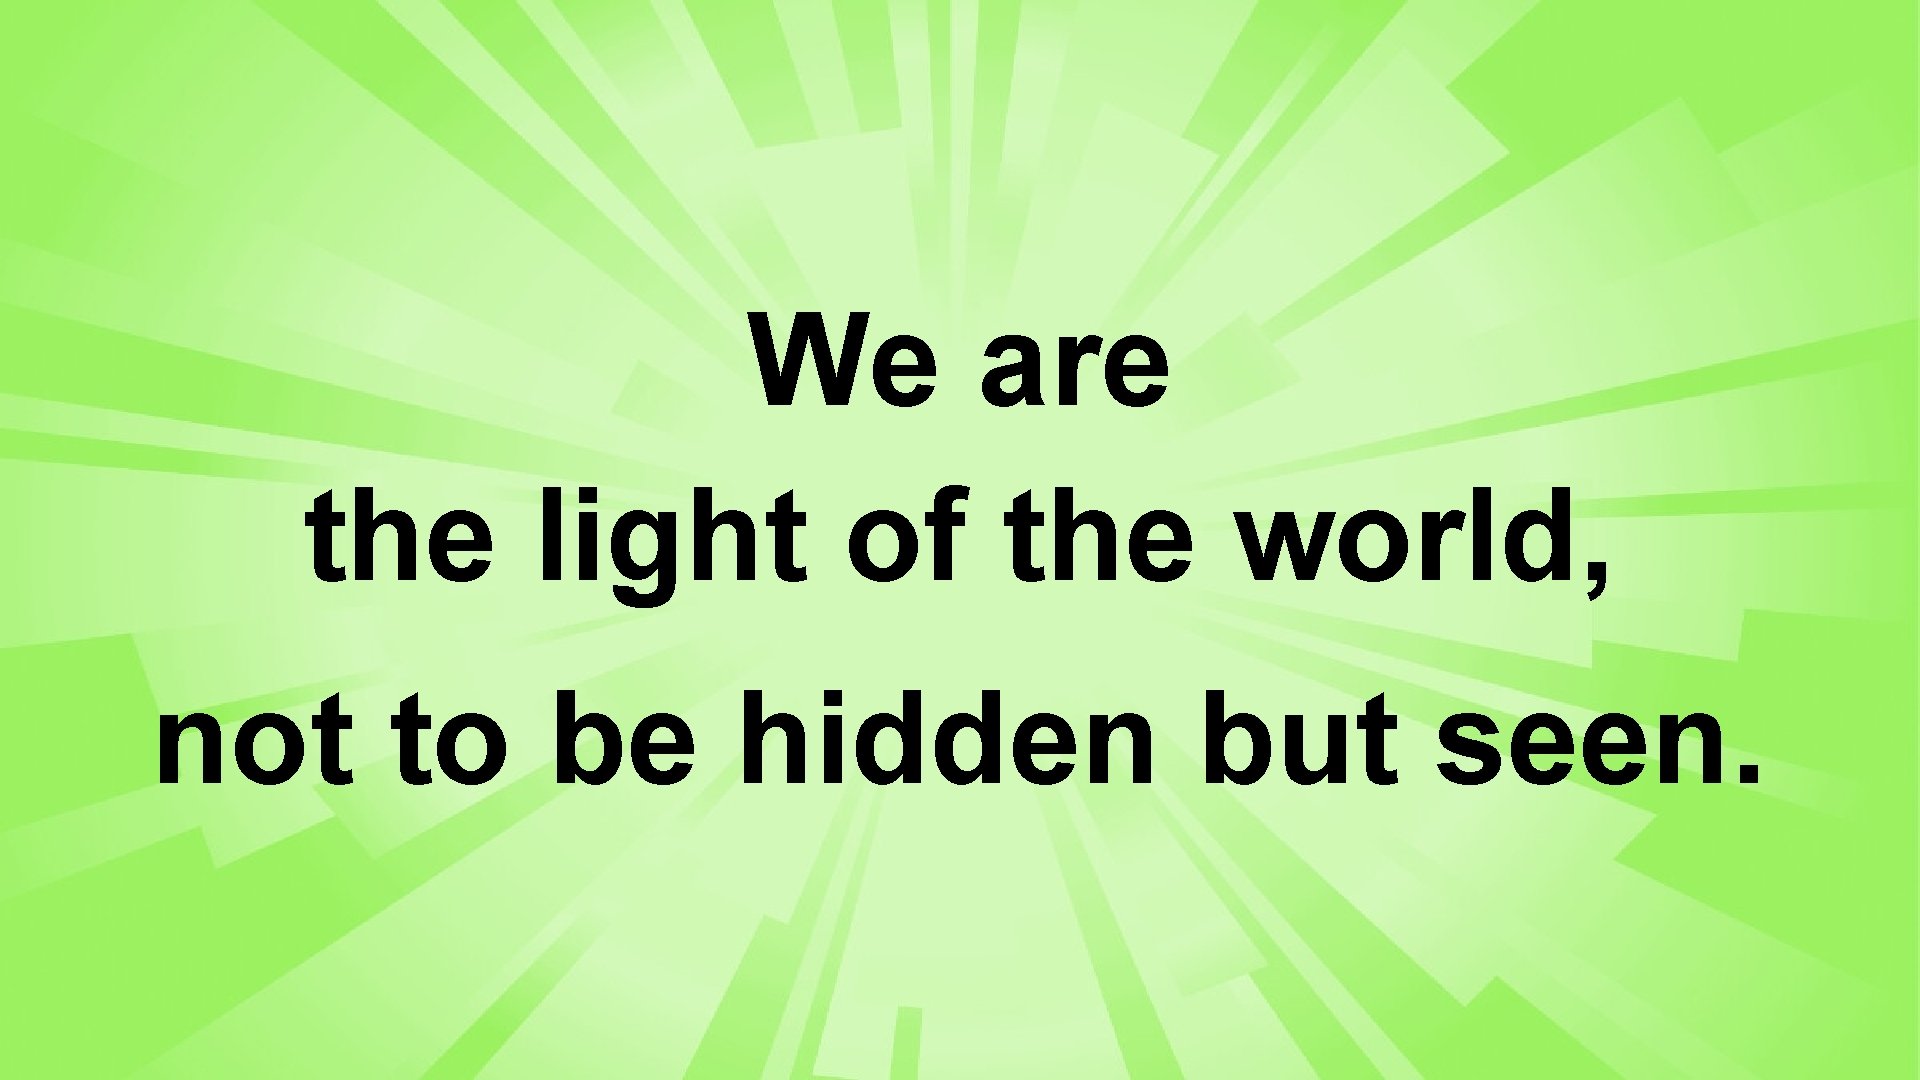 We are the light of the world, not to be hidden but seen. 